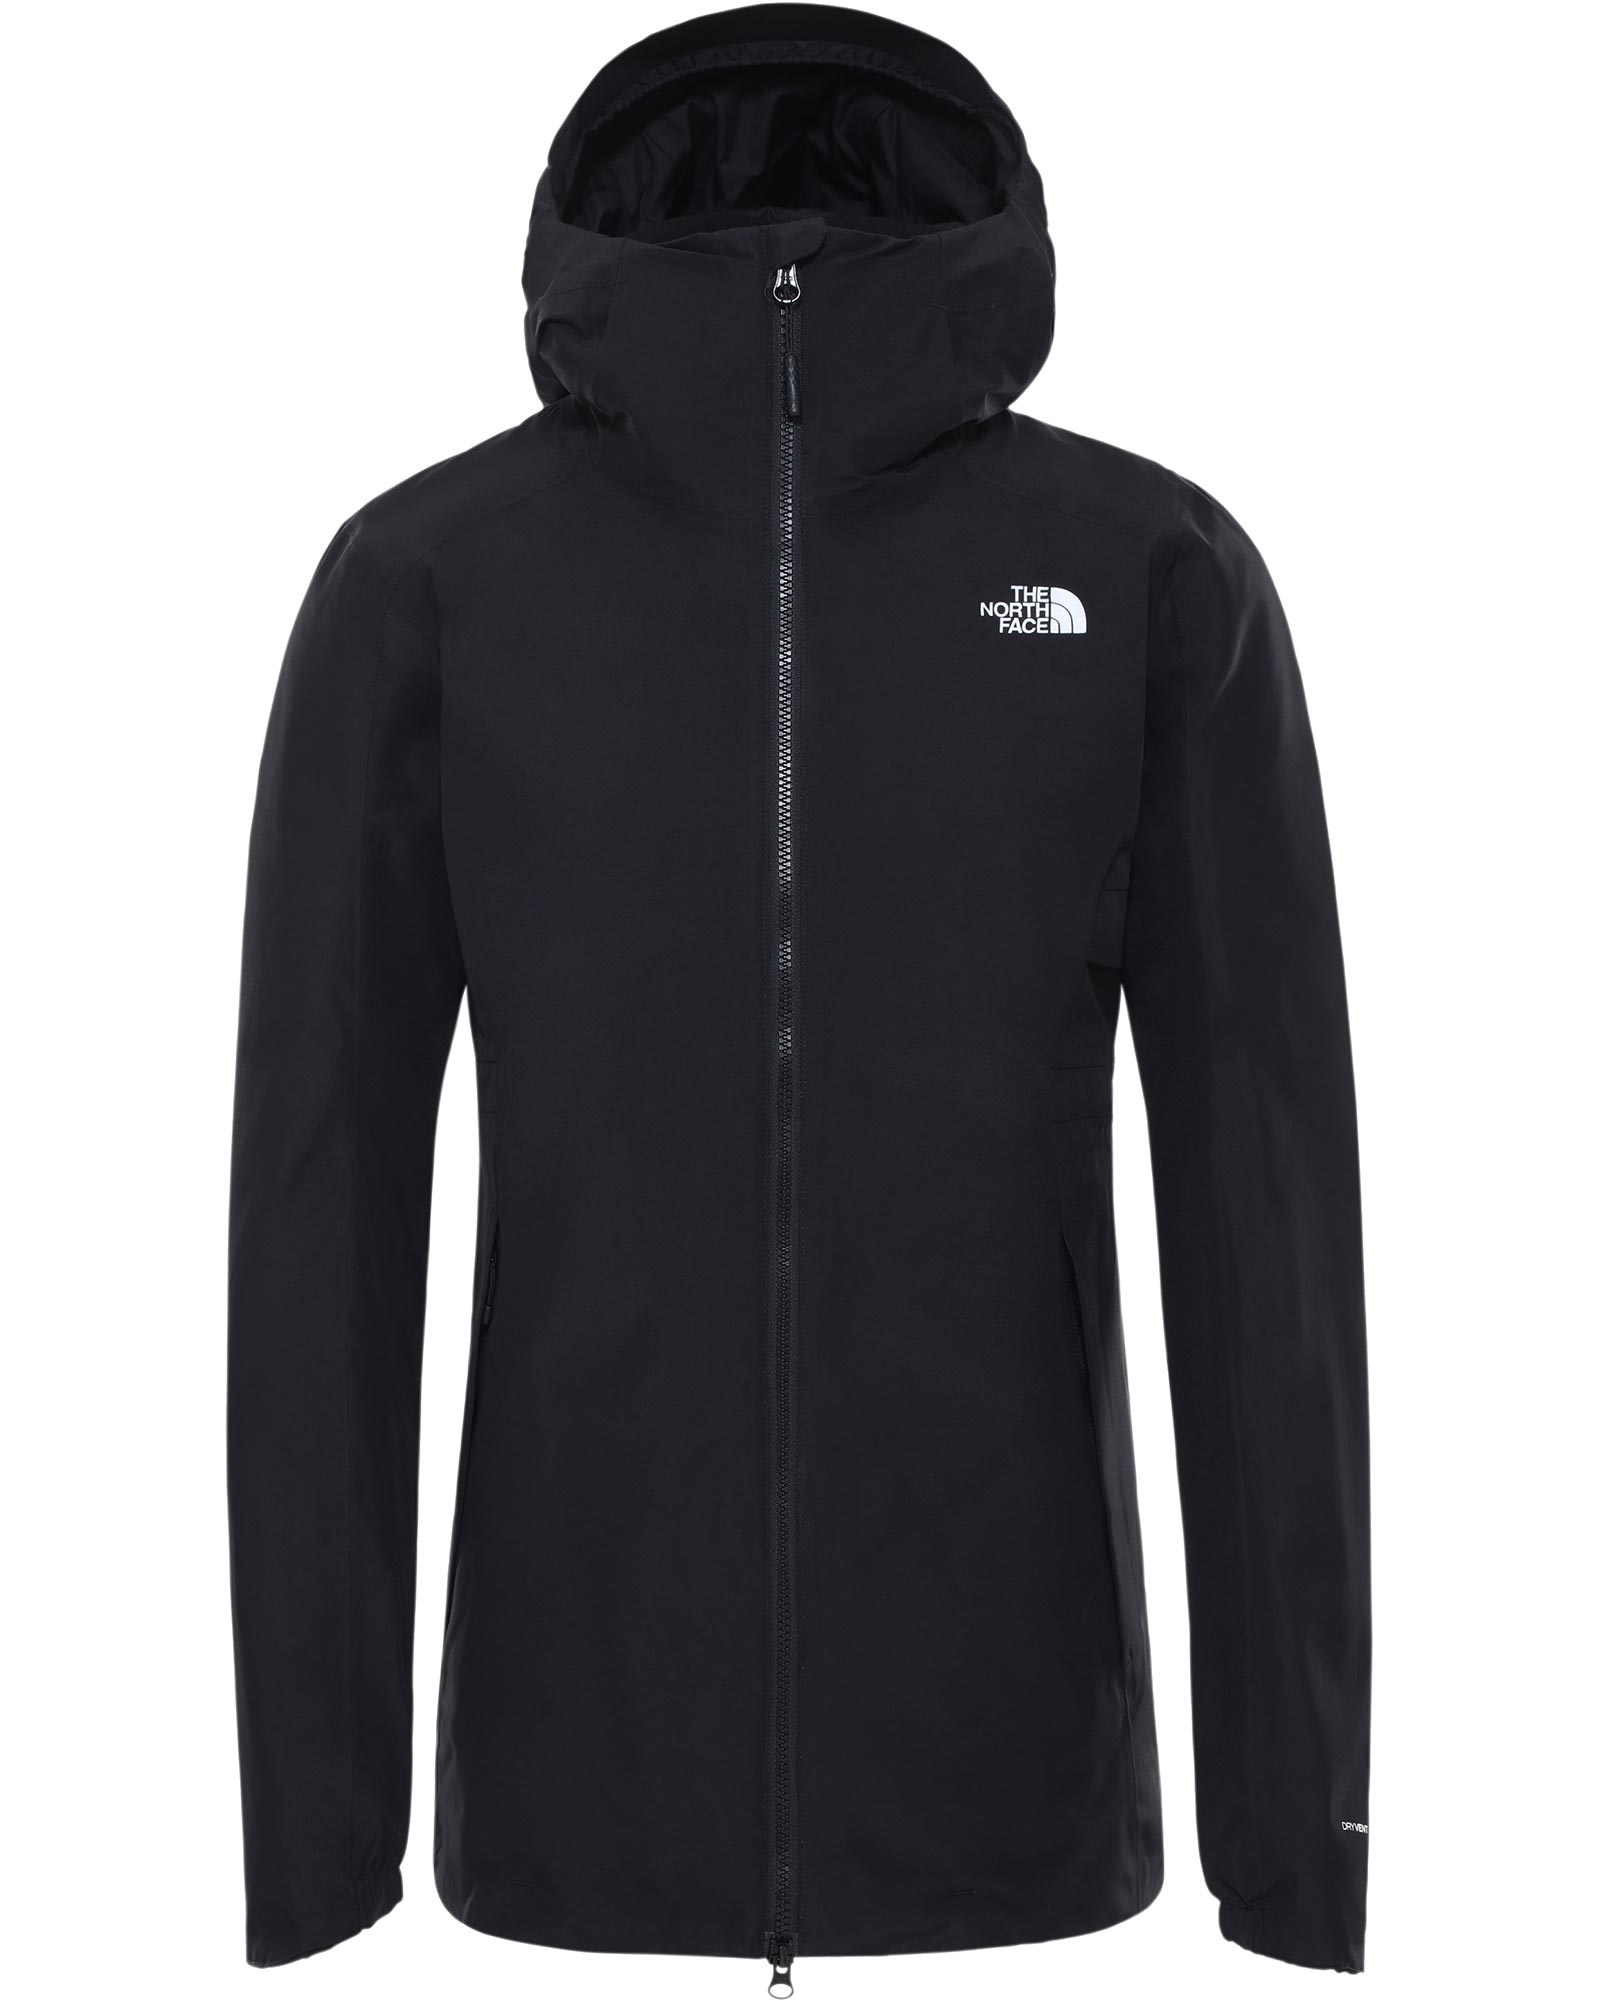 The North Face Hikesteller Women’s Insulated Parka Jacket - TNF Black M